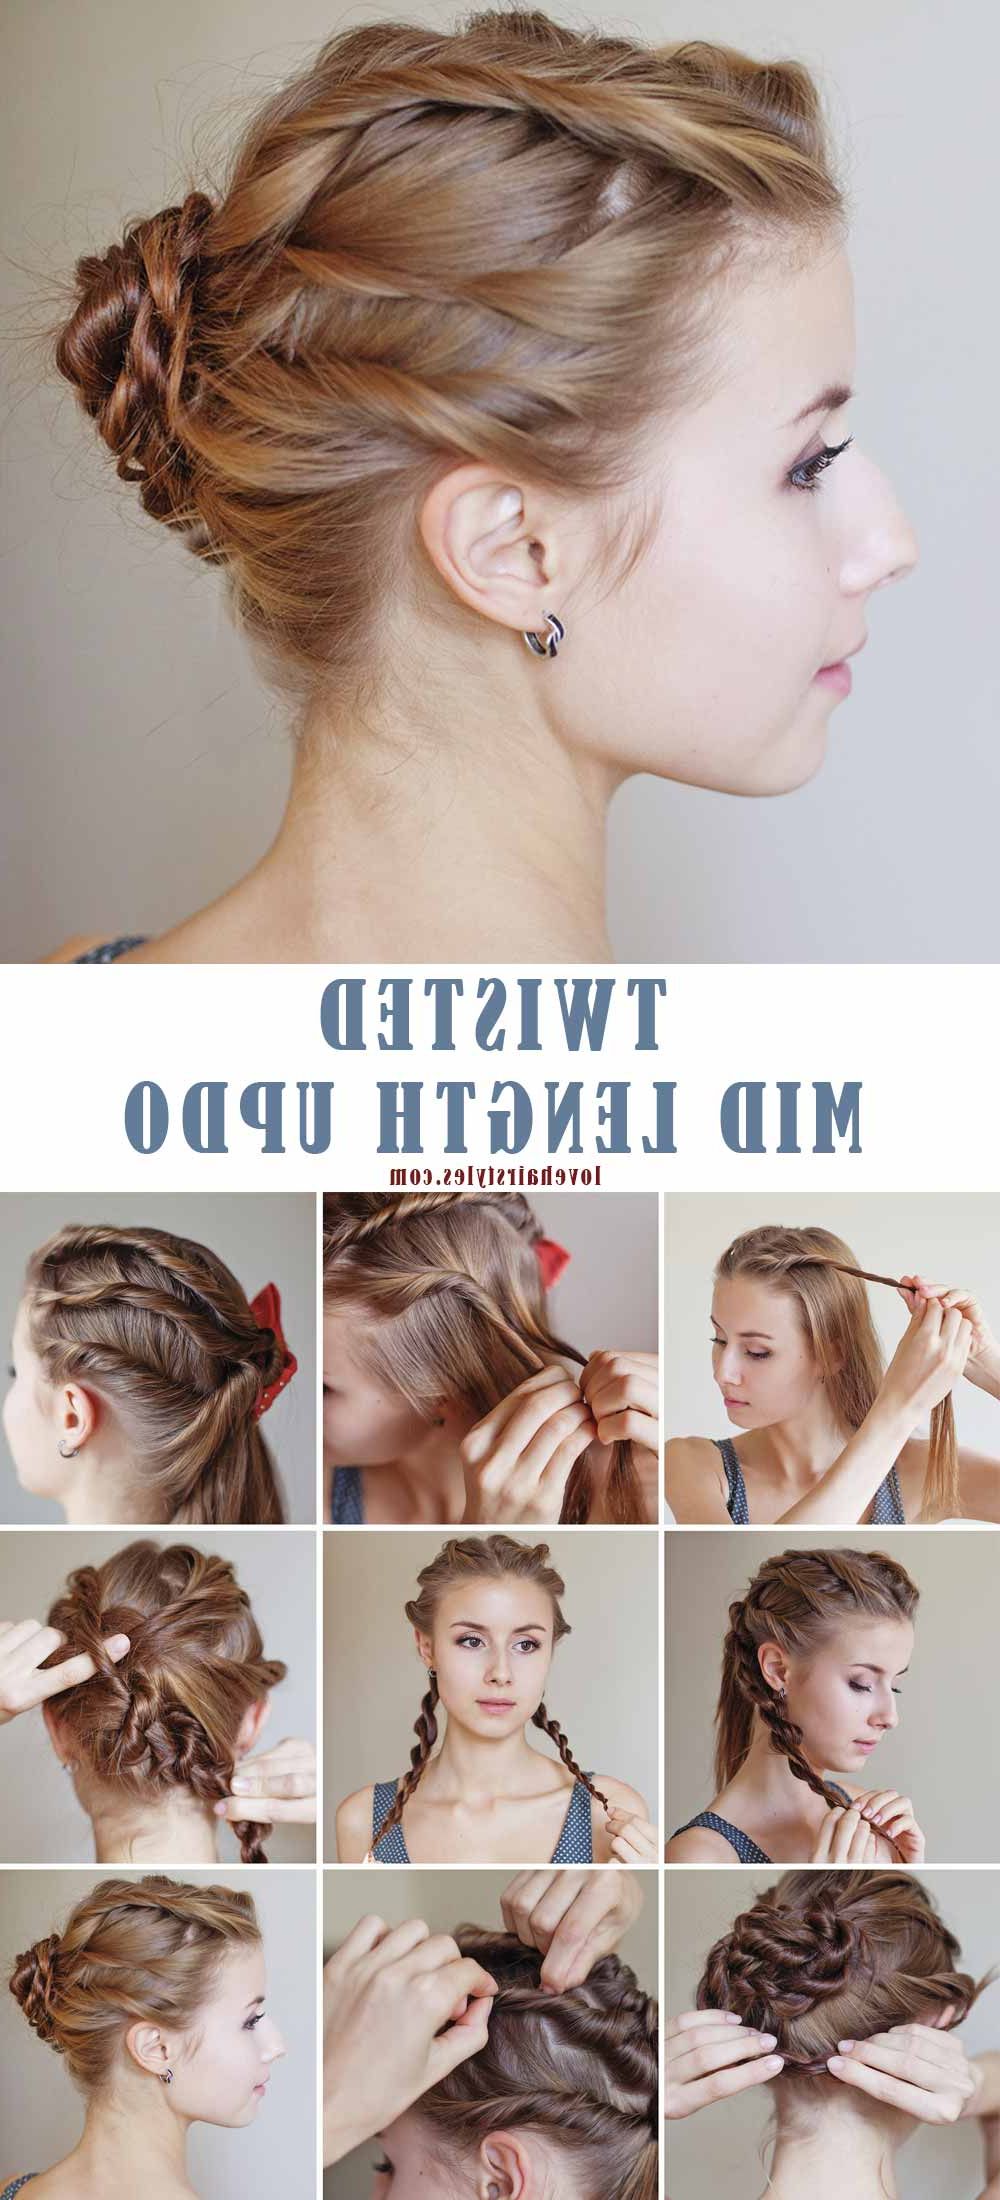 15 Perfectly Easy Hairstyles For Medium Hair – Love Hairstyles Regarding Popular Twisted Buns Hairstyles For Your Medium Hair (View 3 of 20)